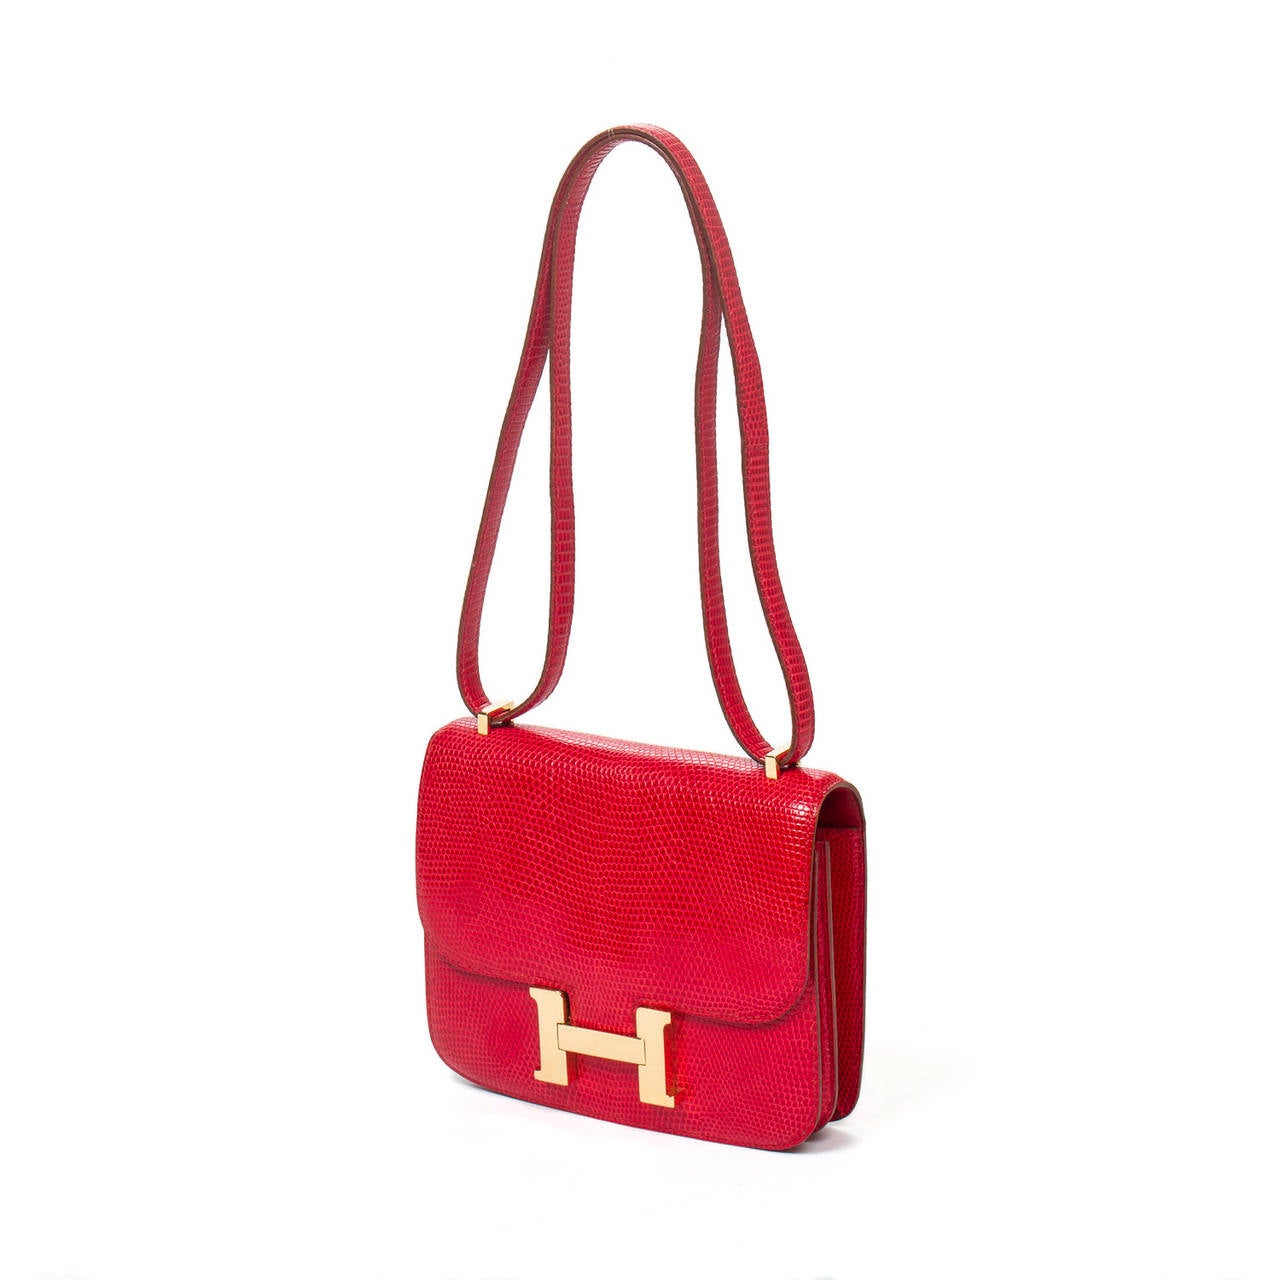 Beautiful Long strap shoulder bag Mini Constance 18cm in red Niloticus Lizard. The inside is in red calf leather and presenting a small pouch, Golden hardware. Perfect condition AA inside and outside.
One or two very light scratches on the H golden